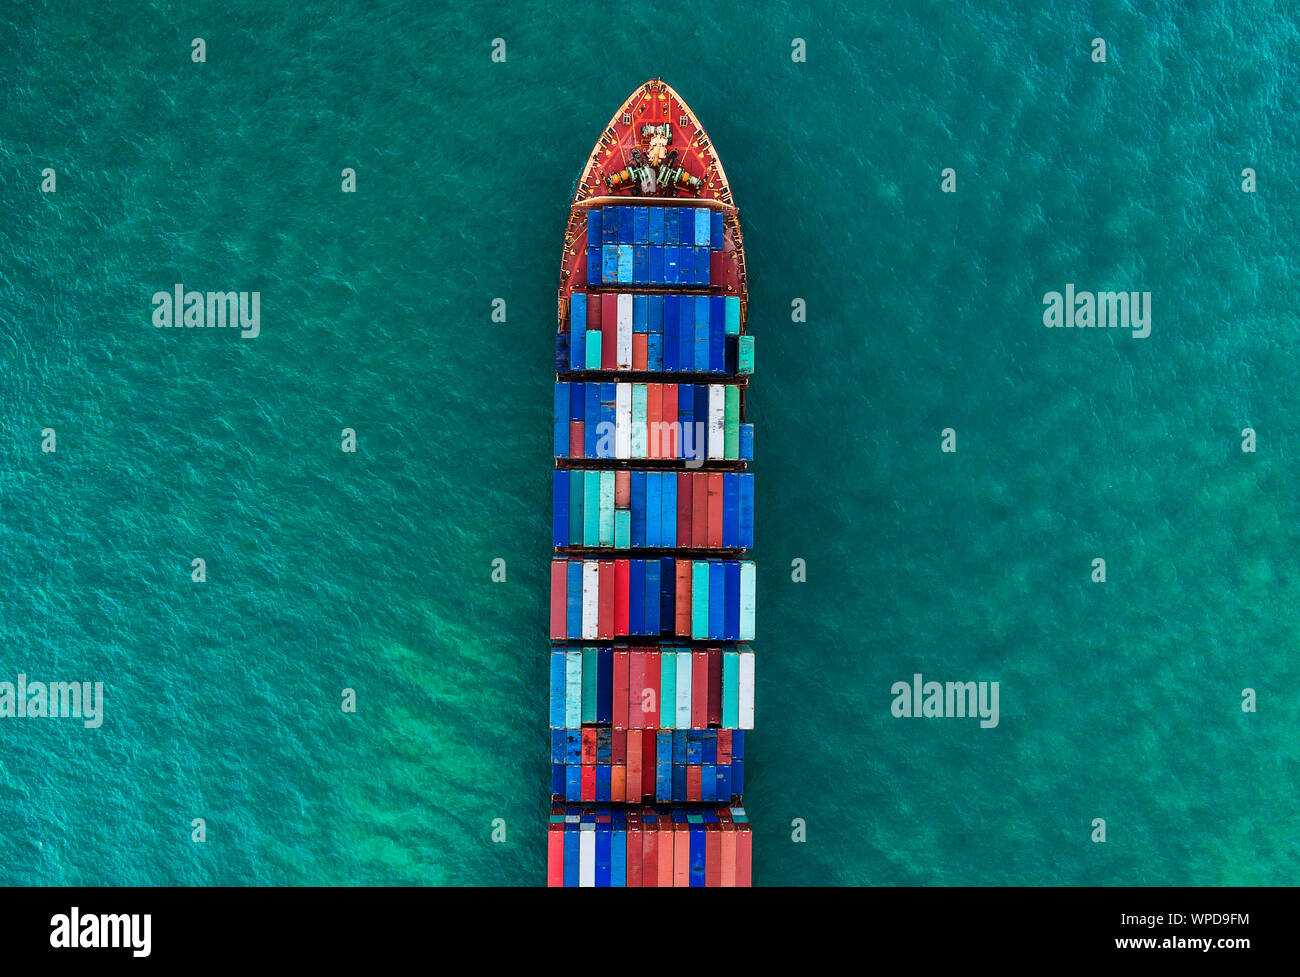 a cargo ship carrying multi-stack of containers in sea crossing international waters an aerial view, Singapore Stock Photo